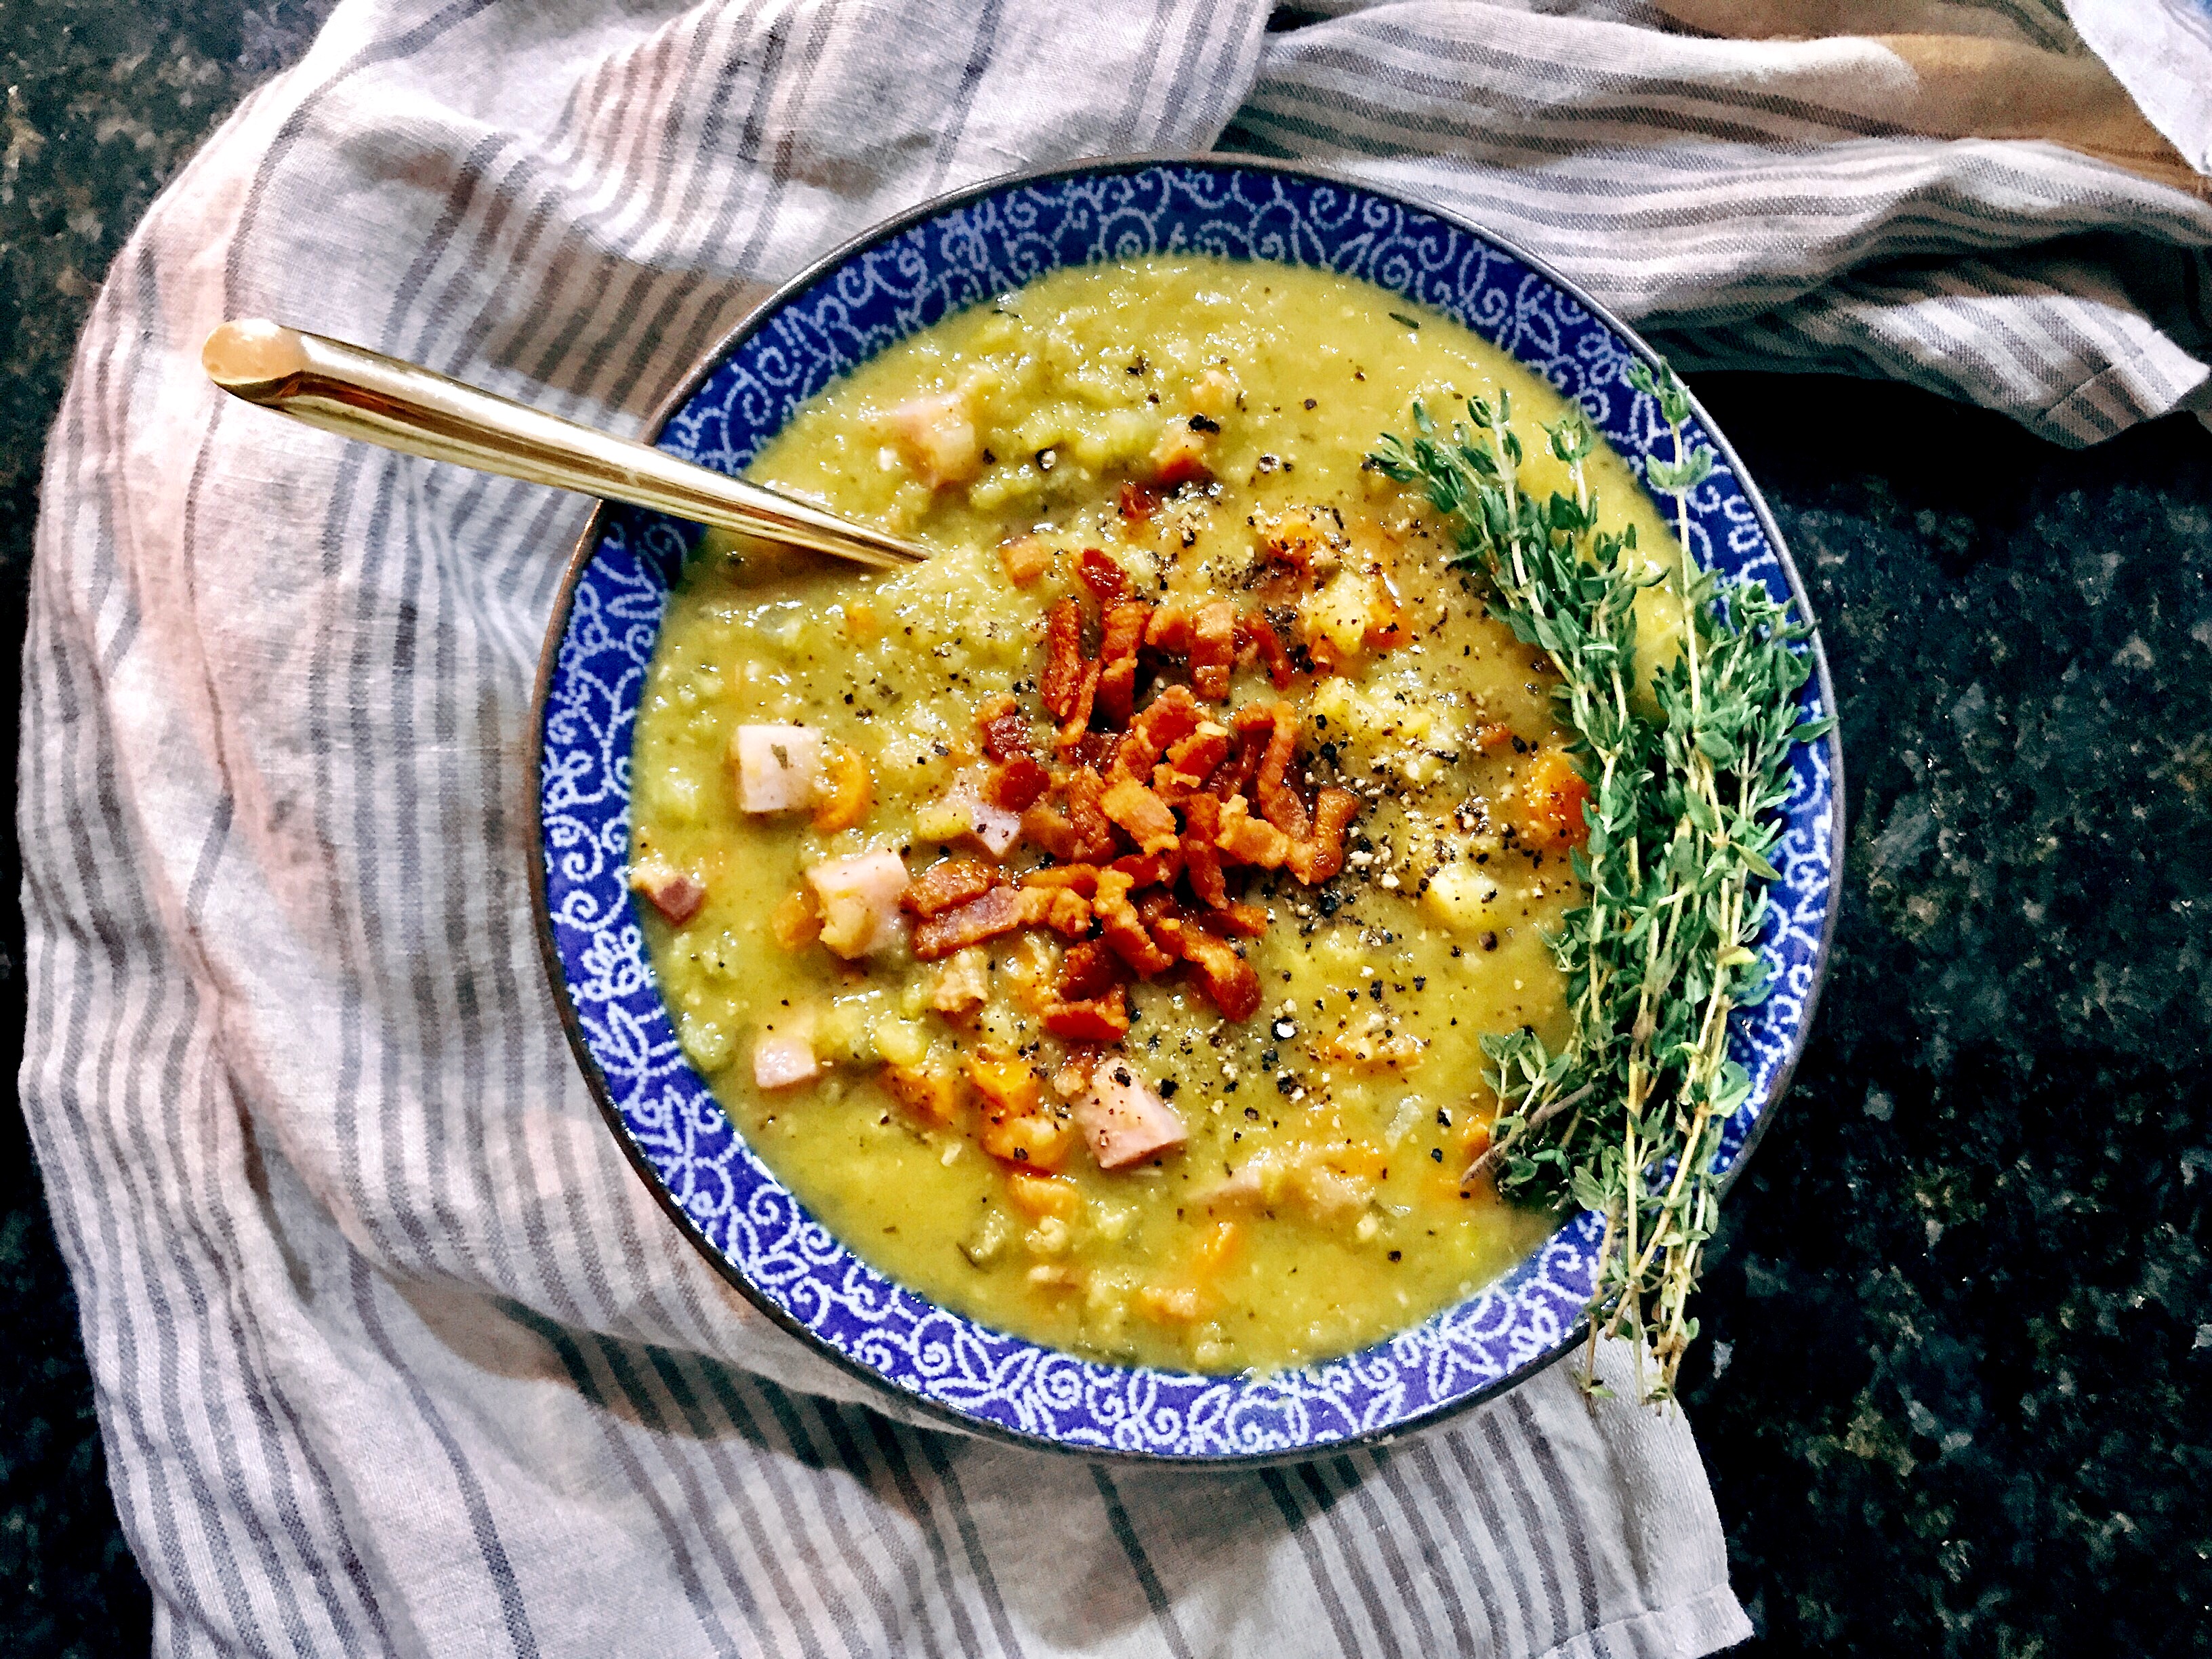 http://ahintofwine.com/wp-content/uploads/2017/11/Split-Pea-Soup-with-Smoked-Bacon-and-Thyme.jpg